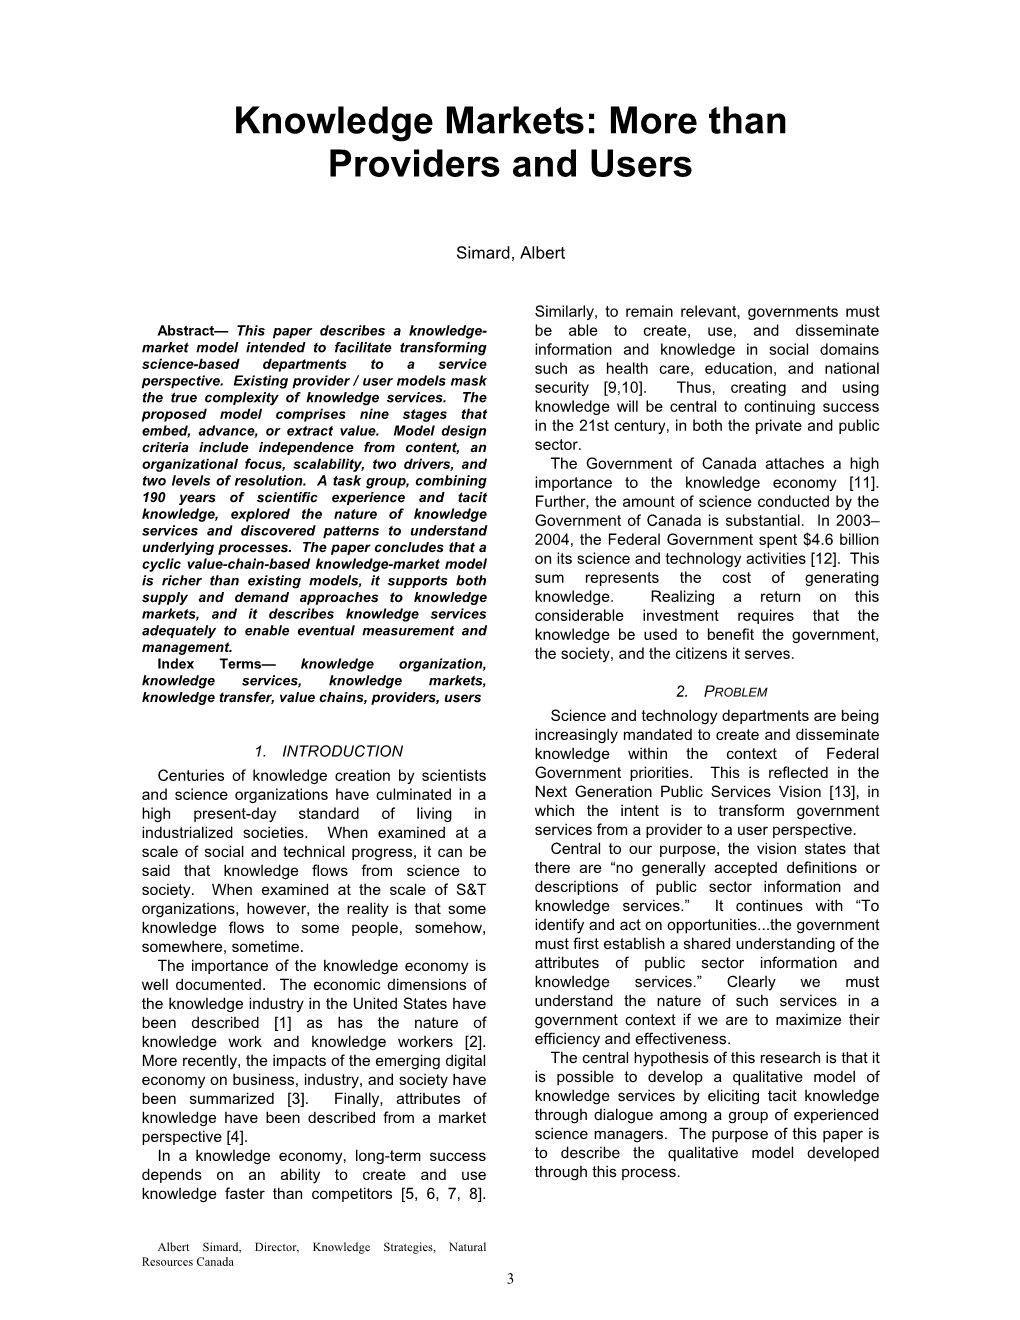 Knowledge Markets: More Than Providers and Users